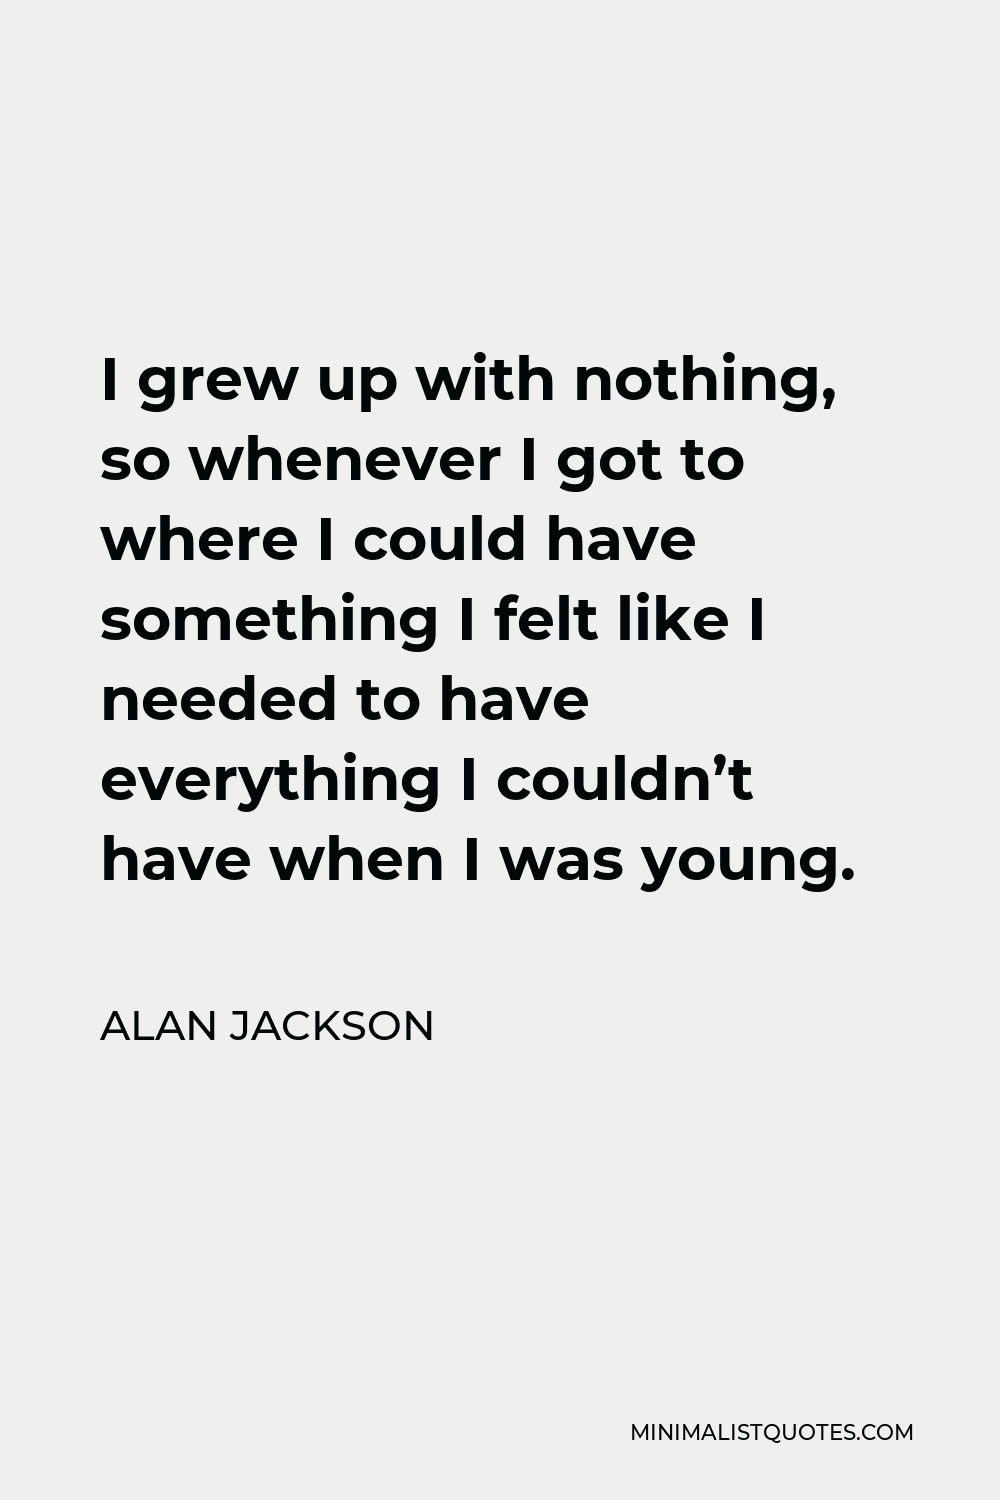 Alan Jackson Quote - I grew up with nothing, so whenever I got to where I could have something I felt like I needed to have everything I couldn’t have when I was young.